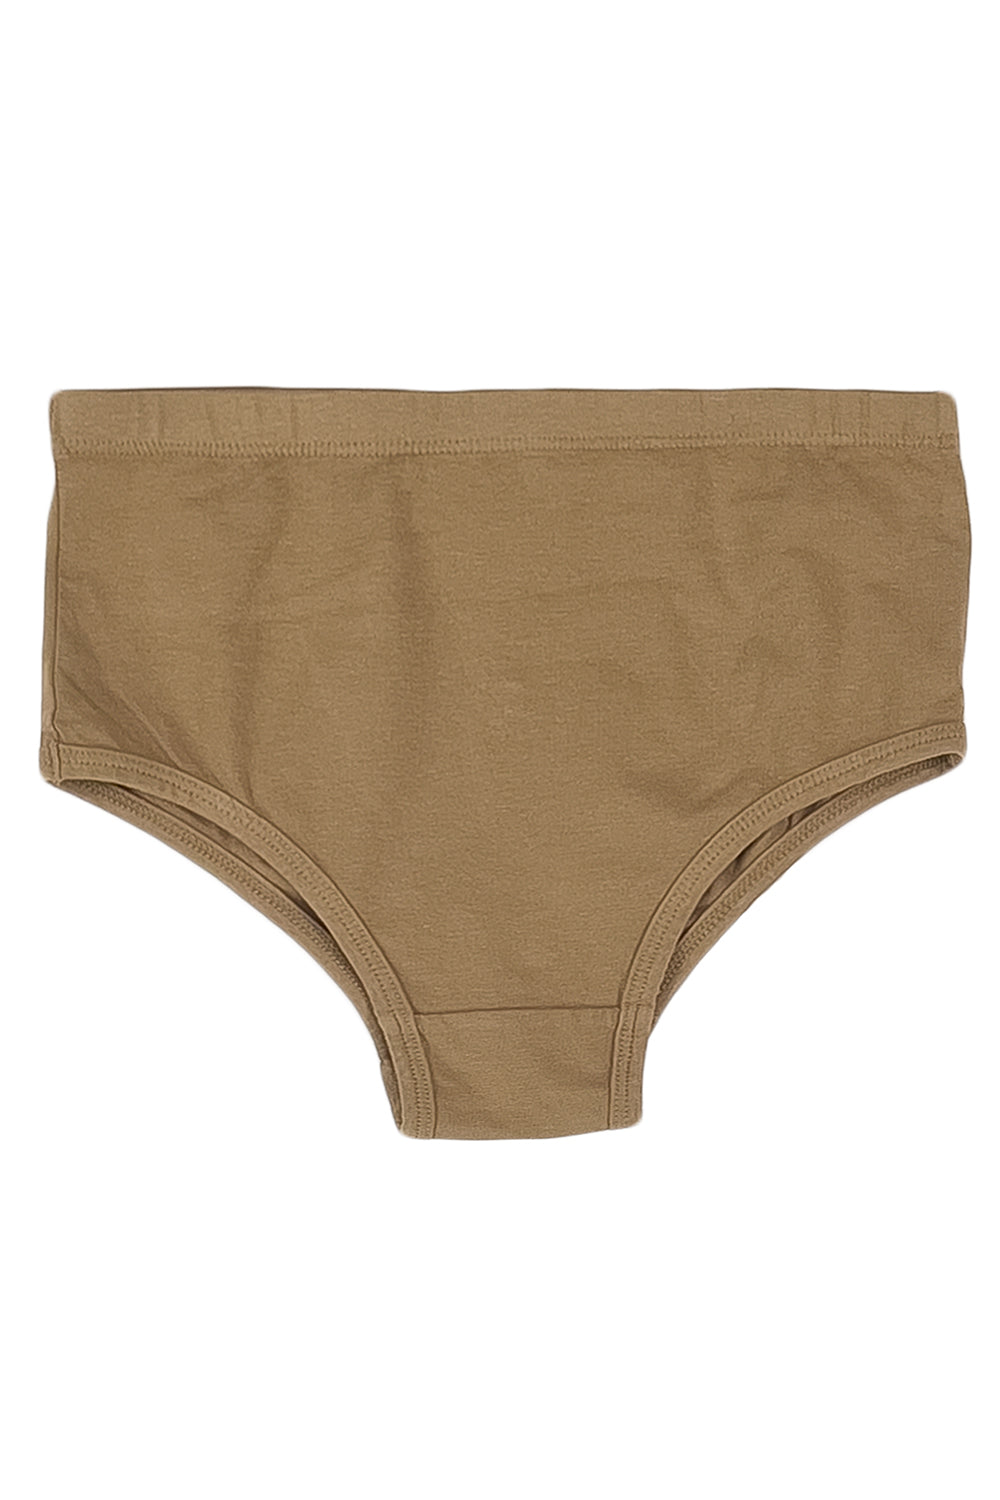 High Waist Brief | Jungmaven Hemp Clothing & Accessories / Color: Coyote